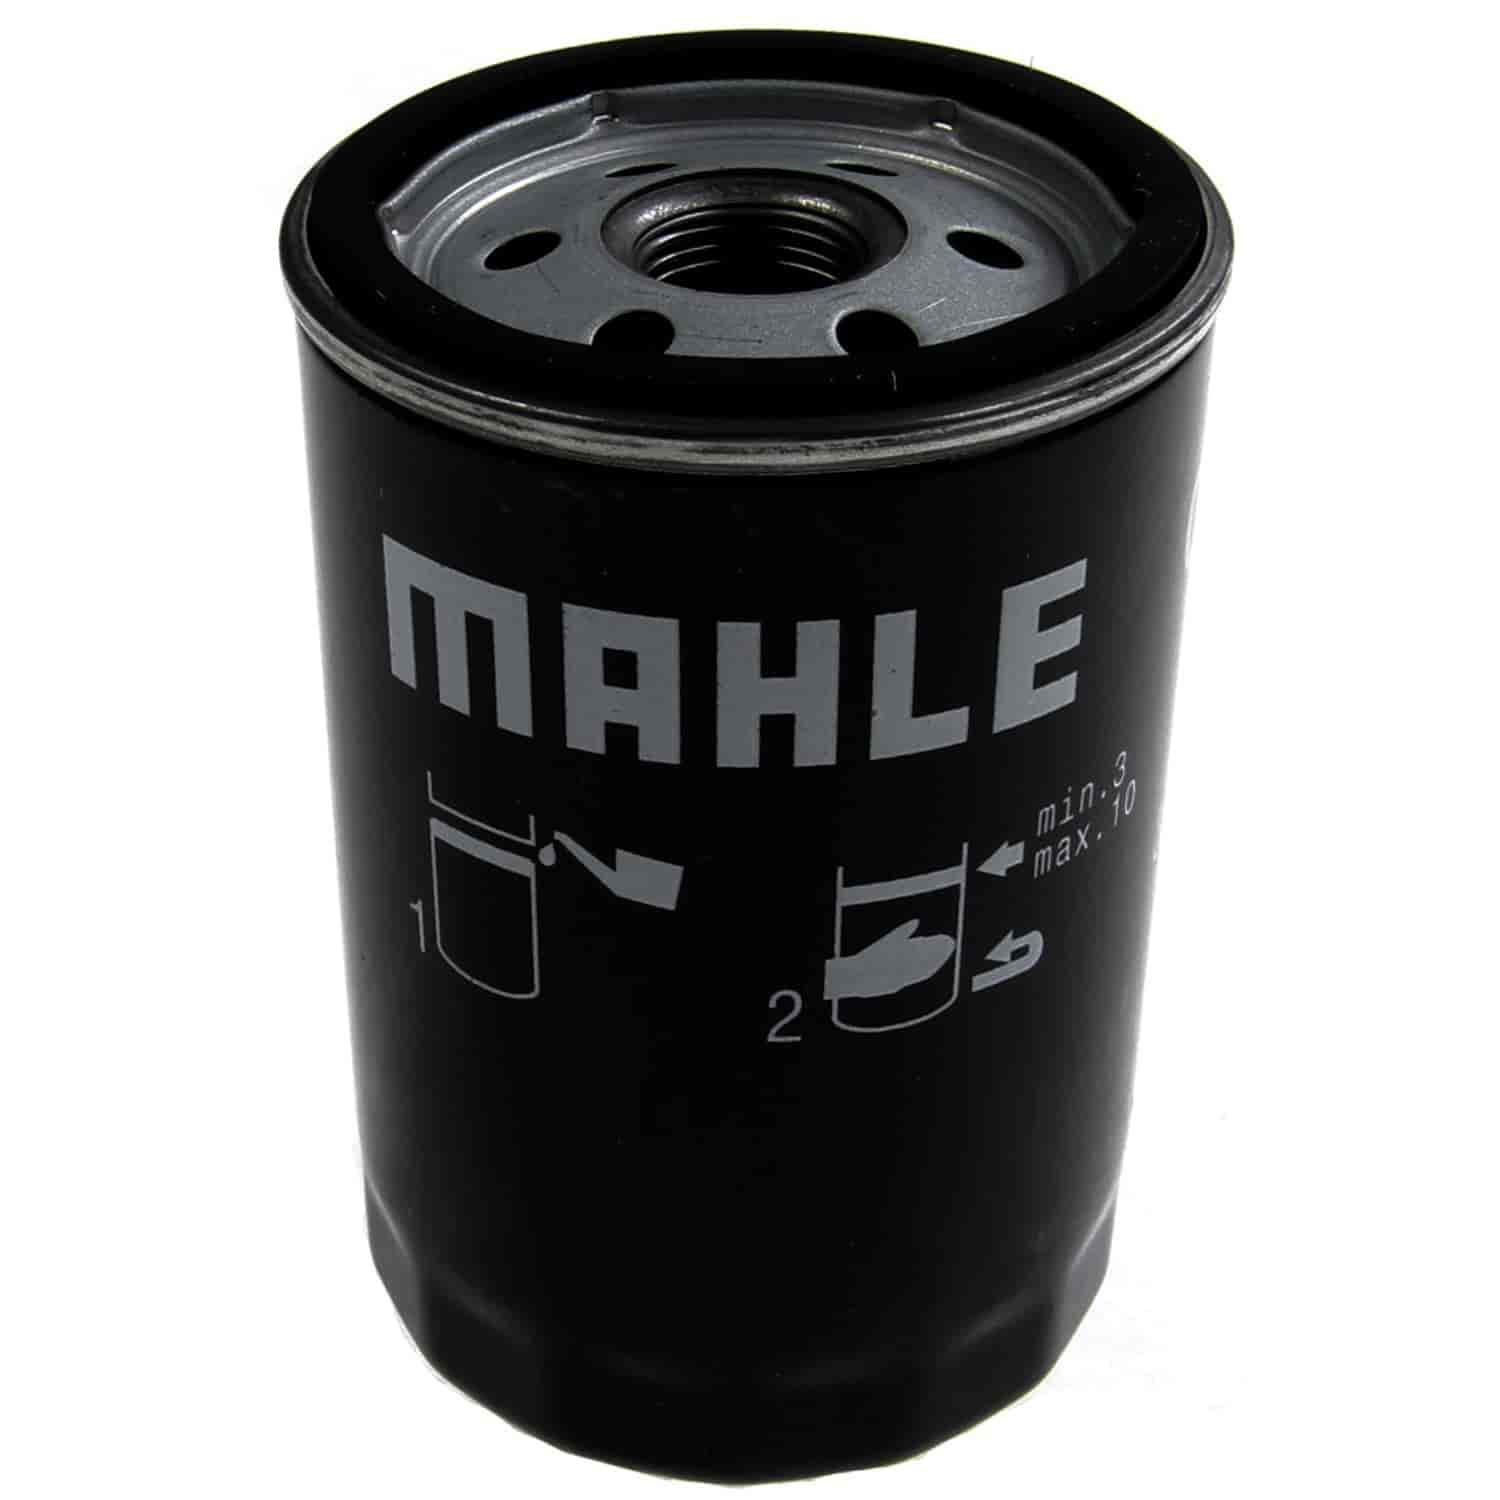 Mahle Oil Filter Jeep Liberty 2.8L Diesel 2005-2006